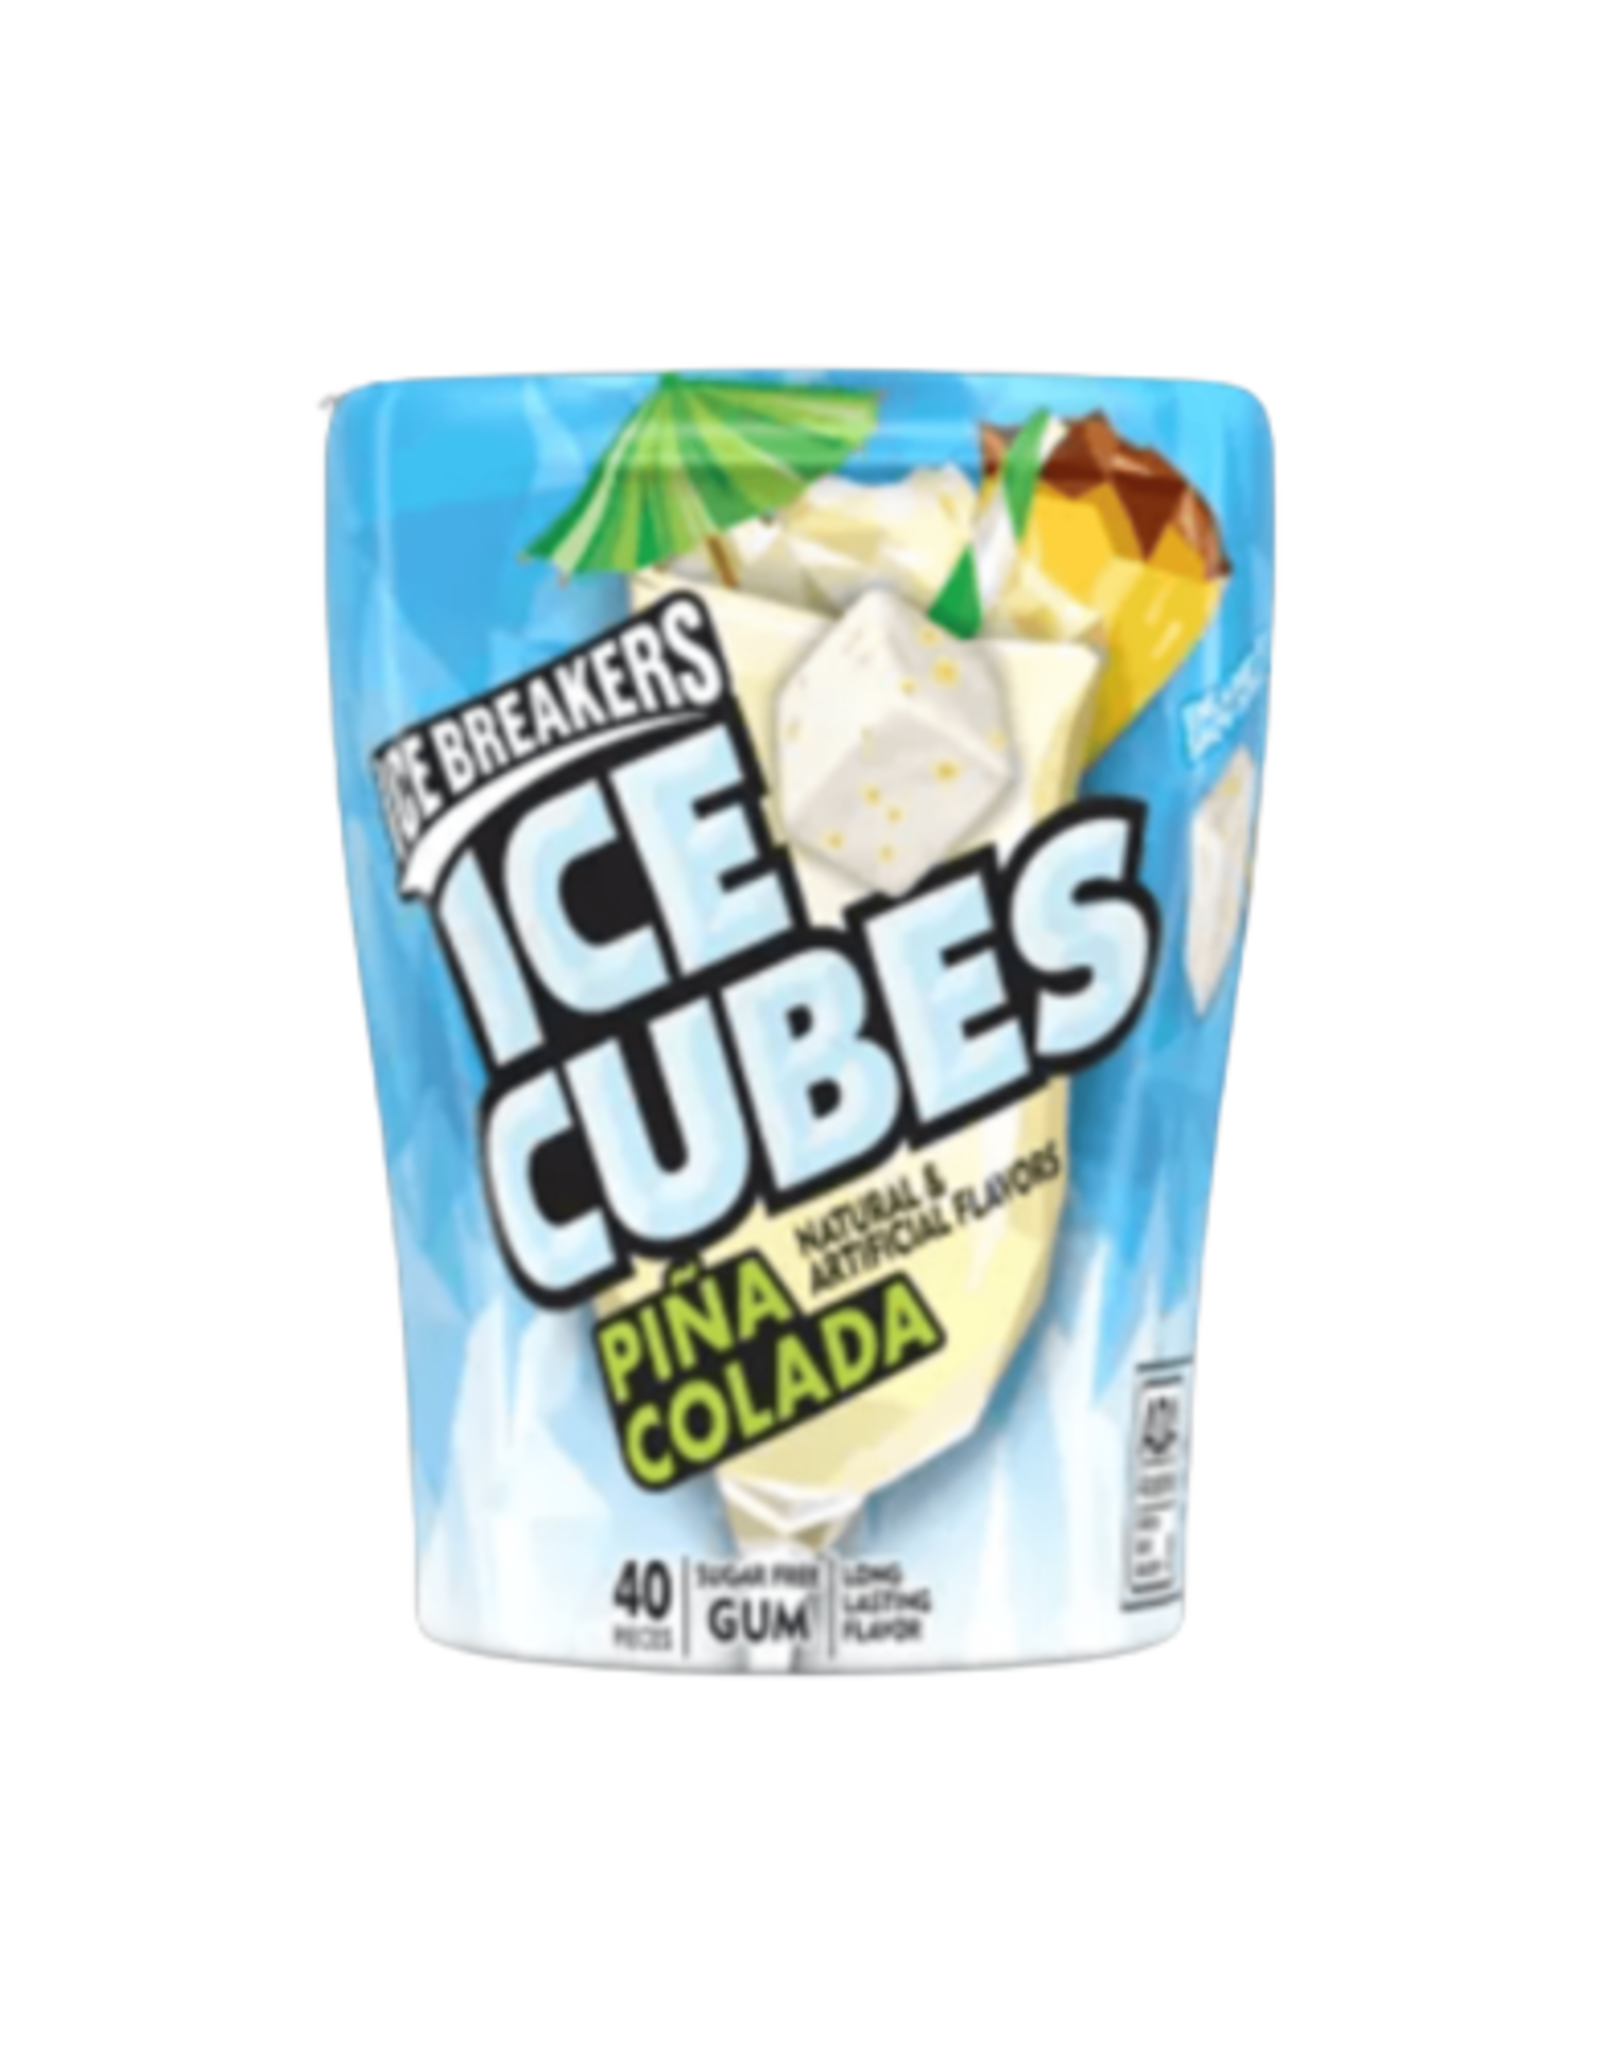 Hershey Ice Breakers Ice Cubes Pina Colada Forty Pieces